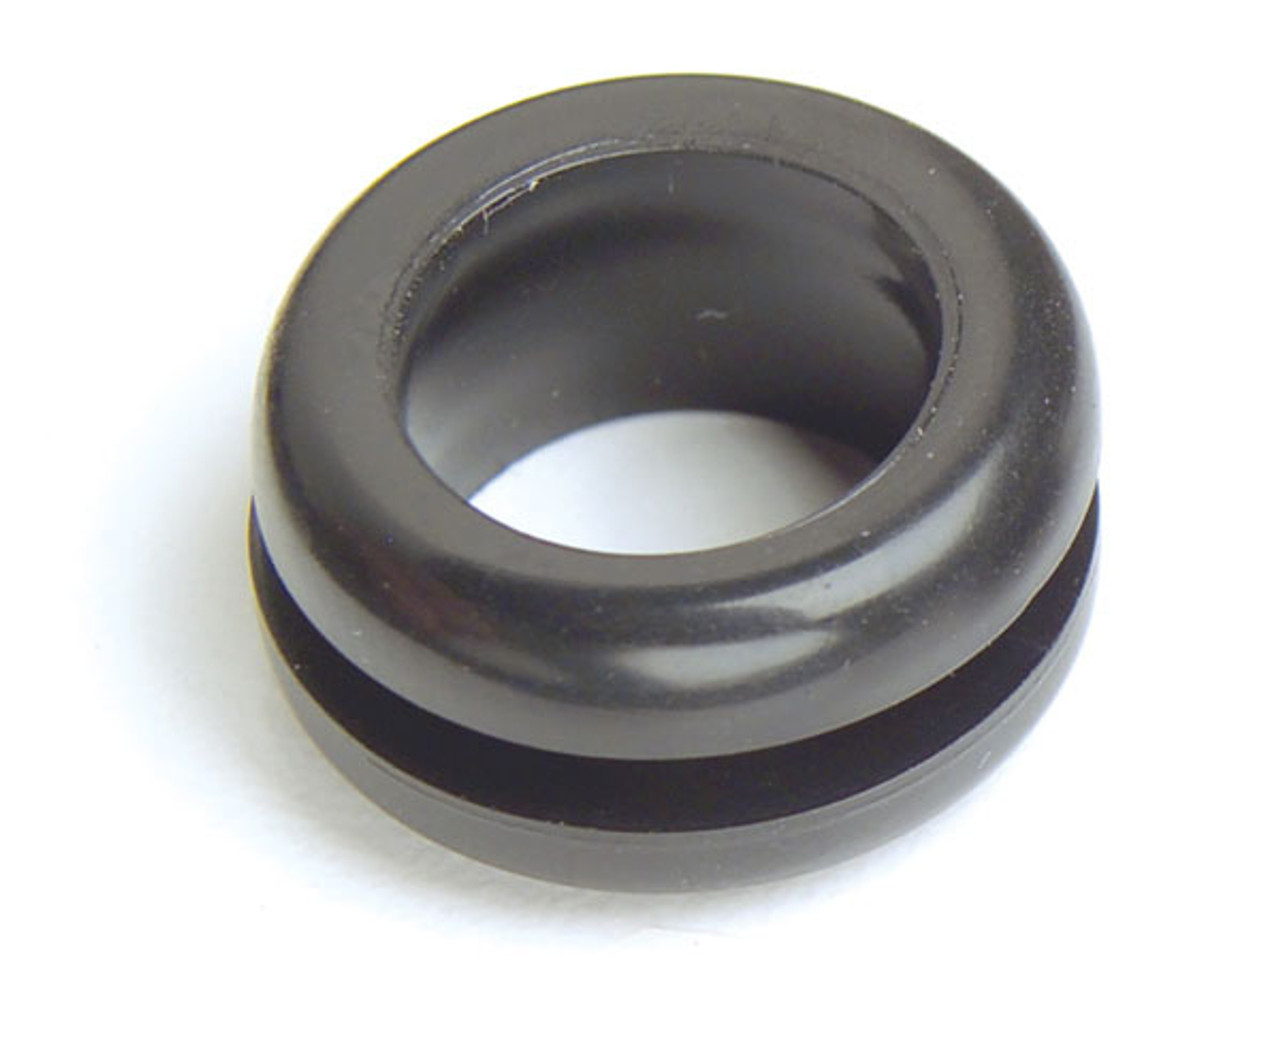 PVC Grommets- 1/2" ID- Pack of 30 (Grote 83-7026)